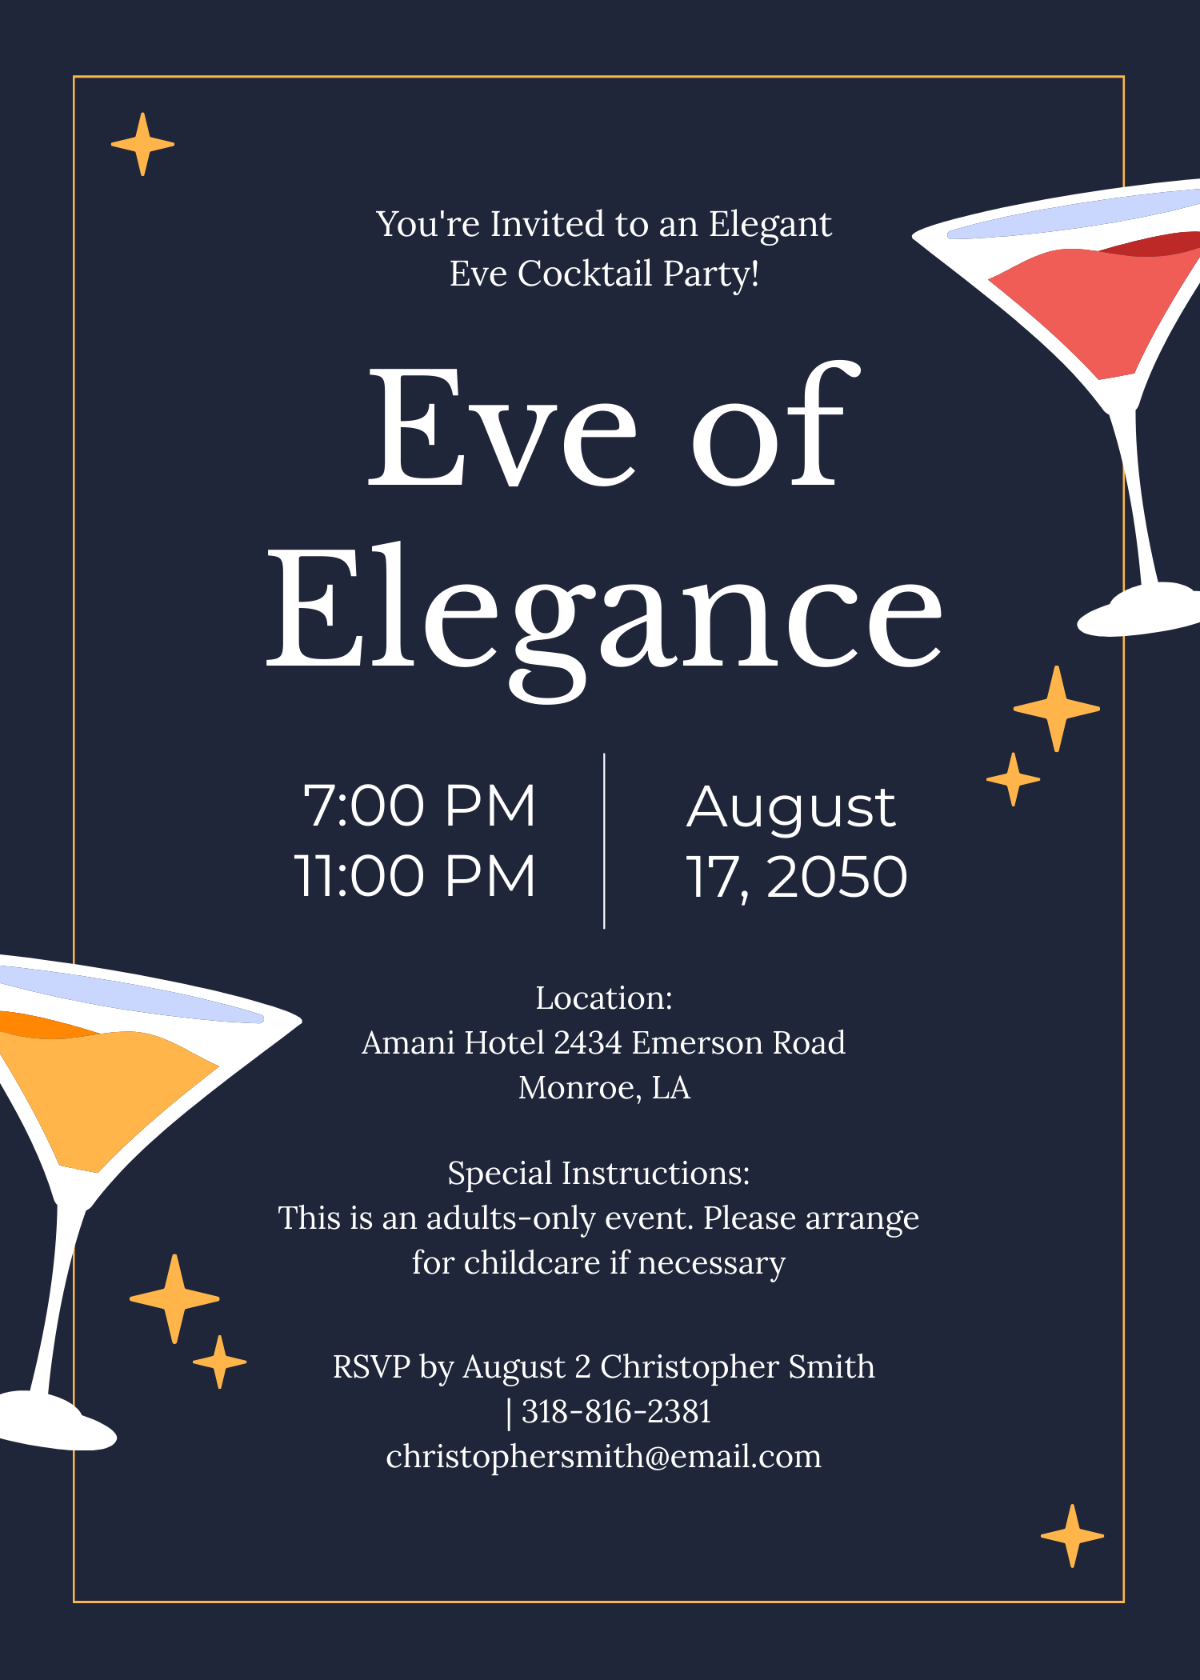 Eve Cocktail Party Invitation